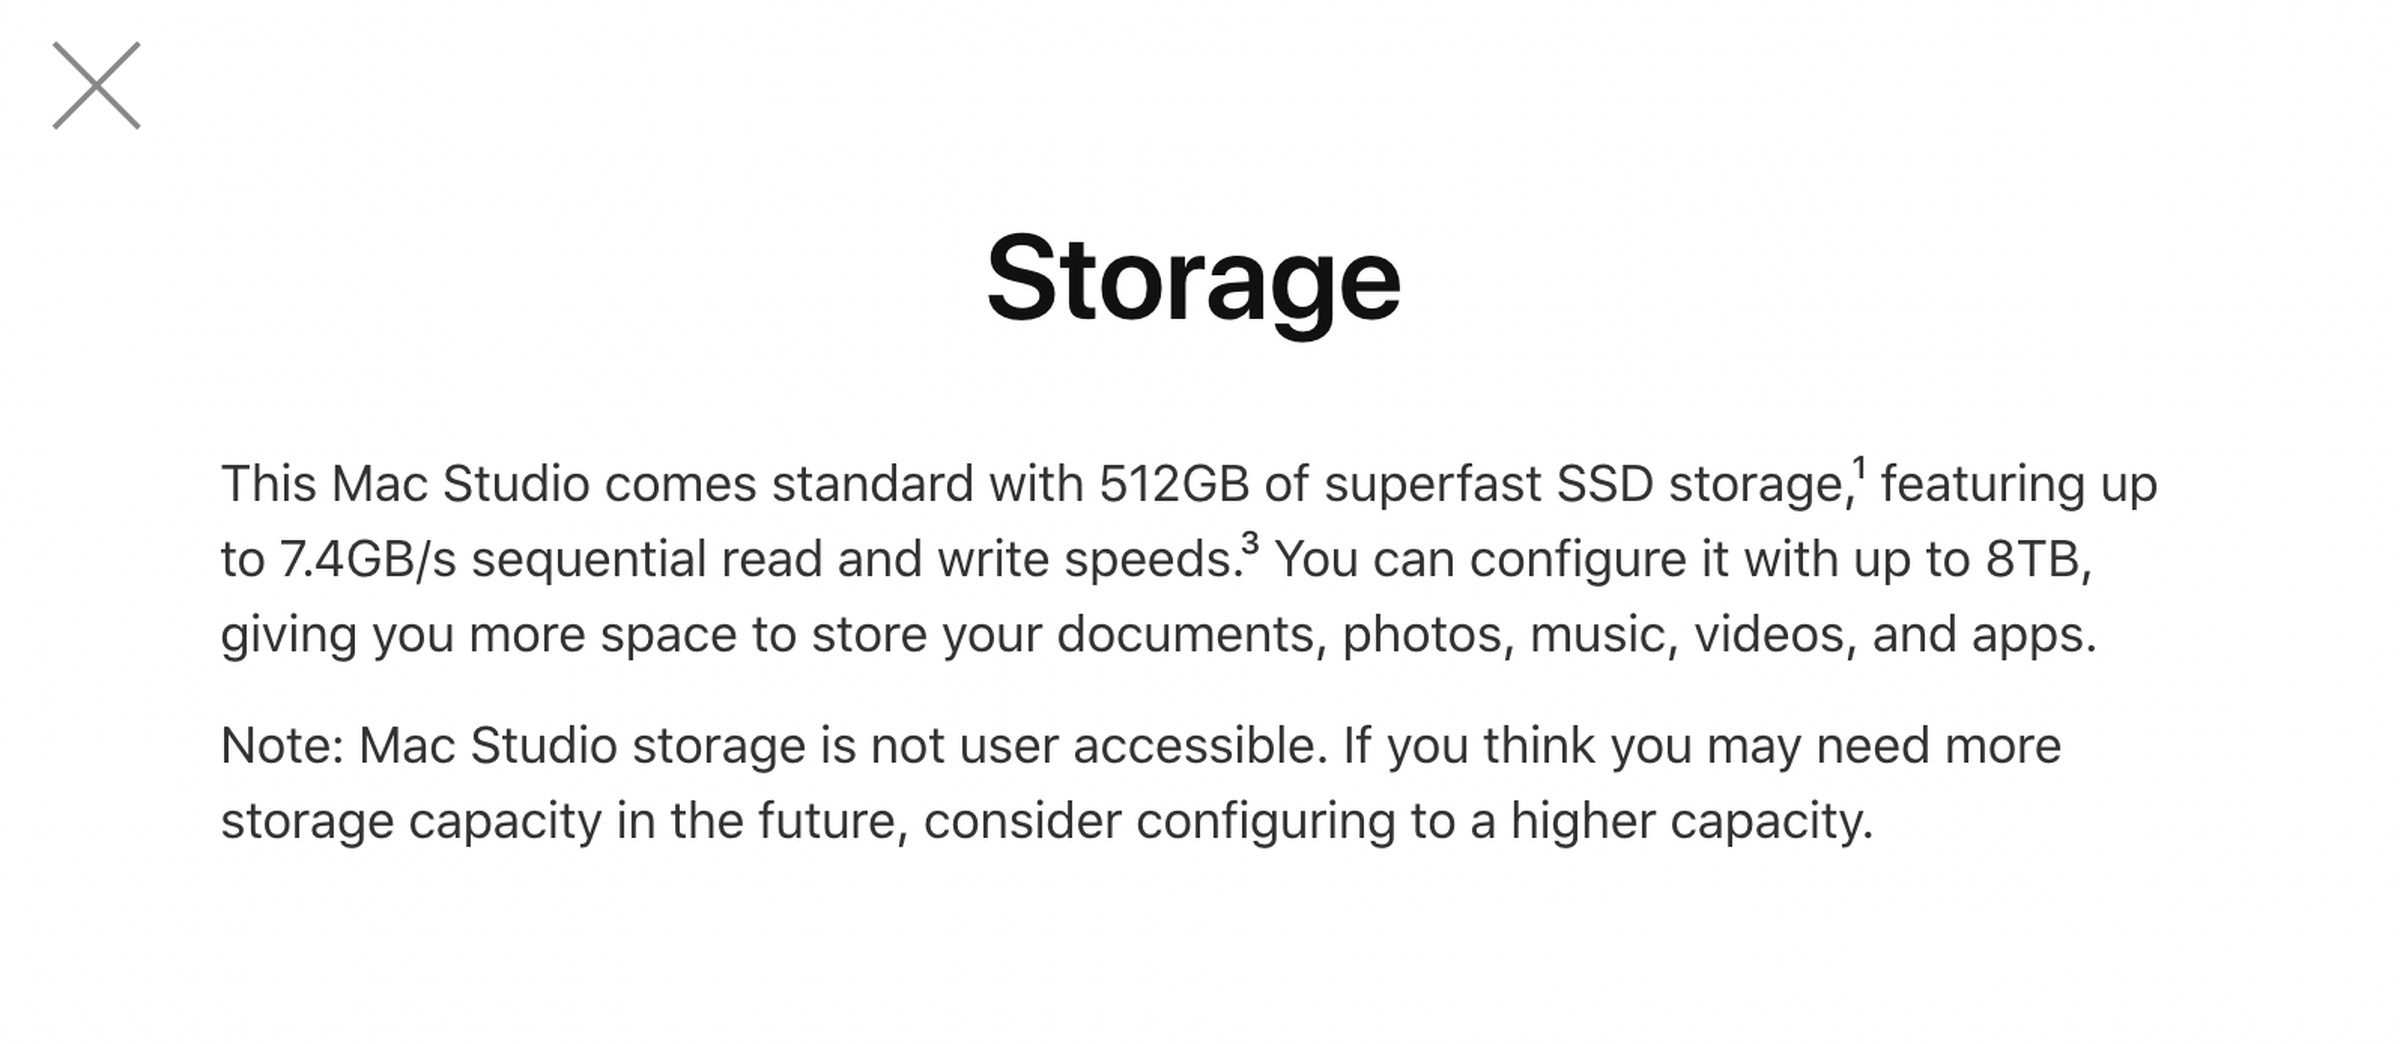 Apple says users can’t access the Mac Studio’s storage.